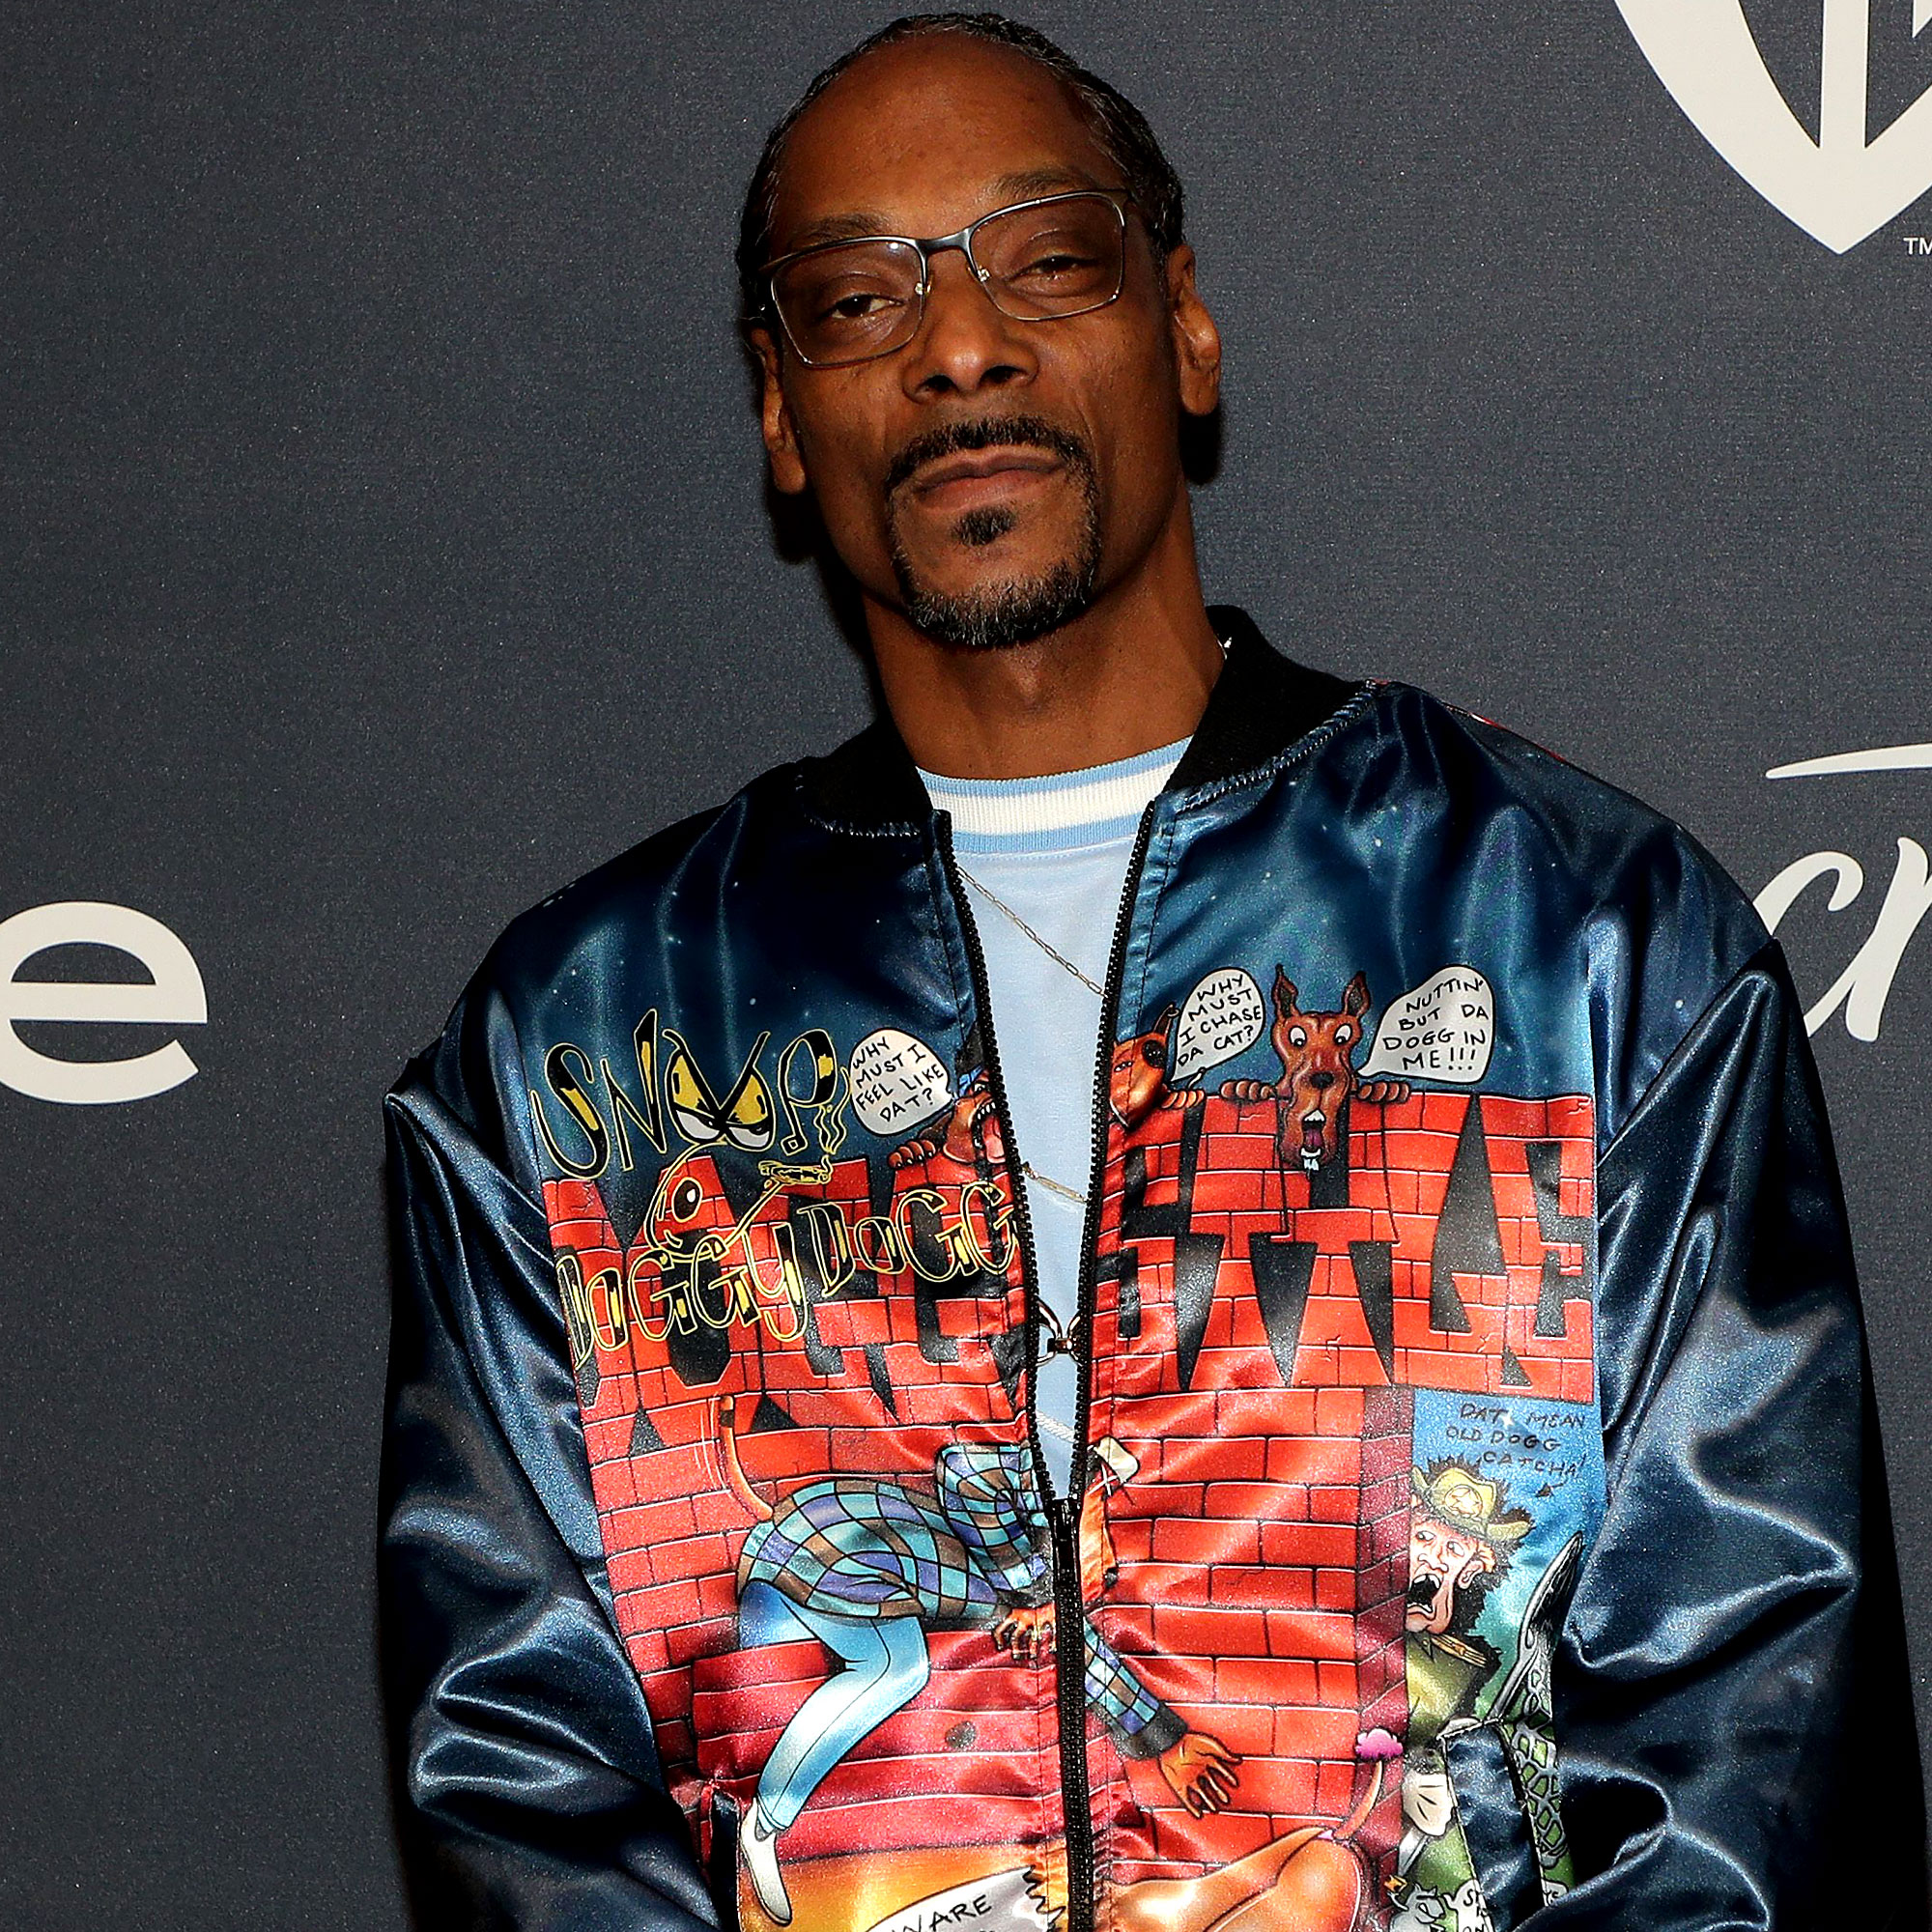 Snoop Dogg denies sexual assault claims and calls lawsuit a "Shakedown Scheme" thumbnail